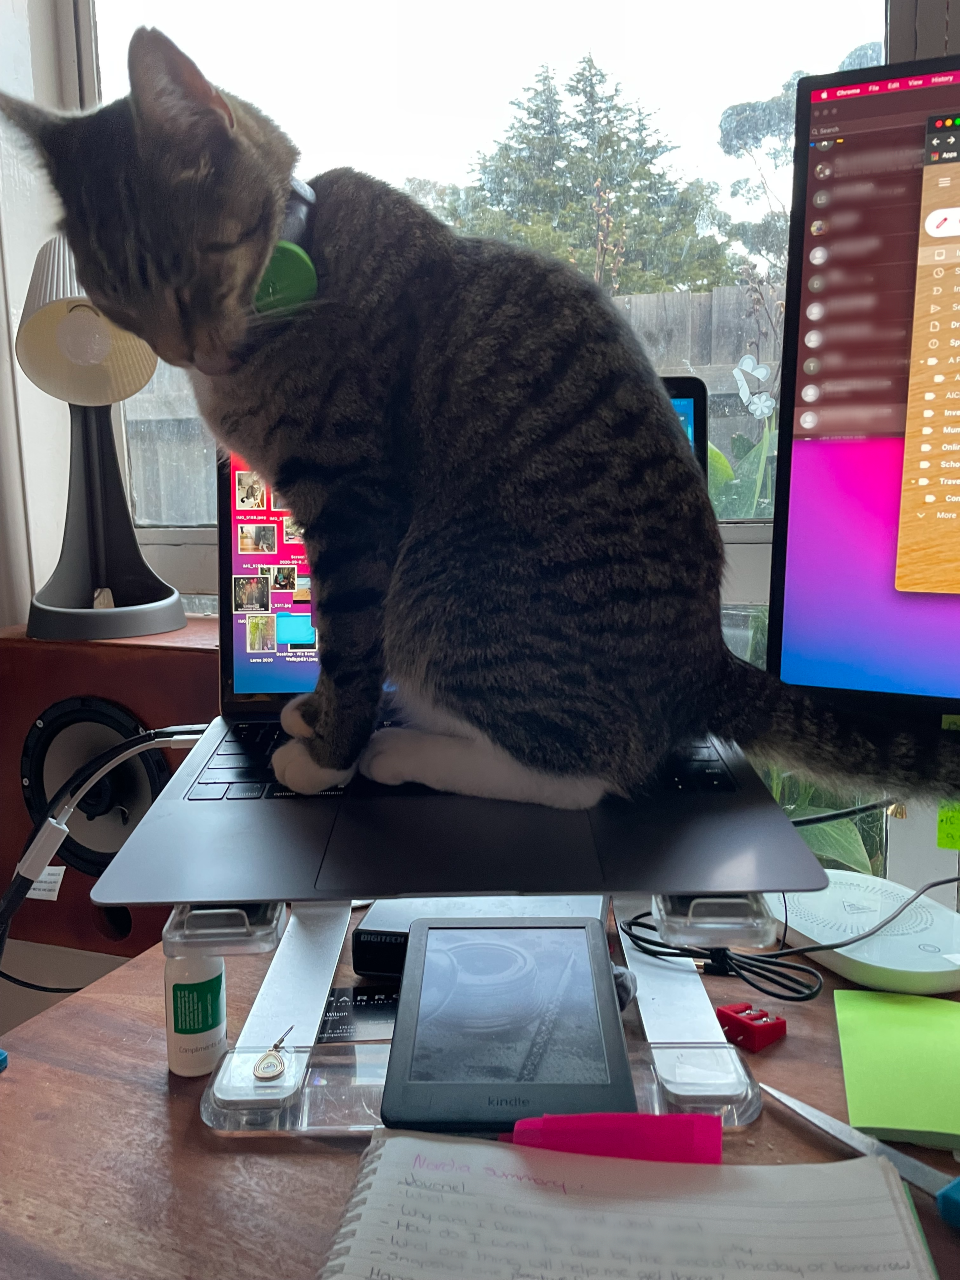 A kitty standing on a laptop